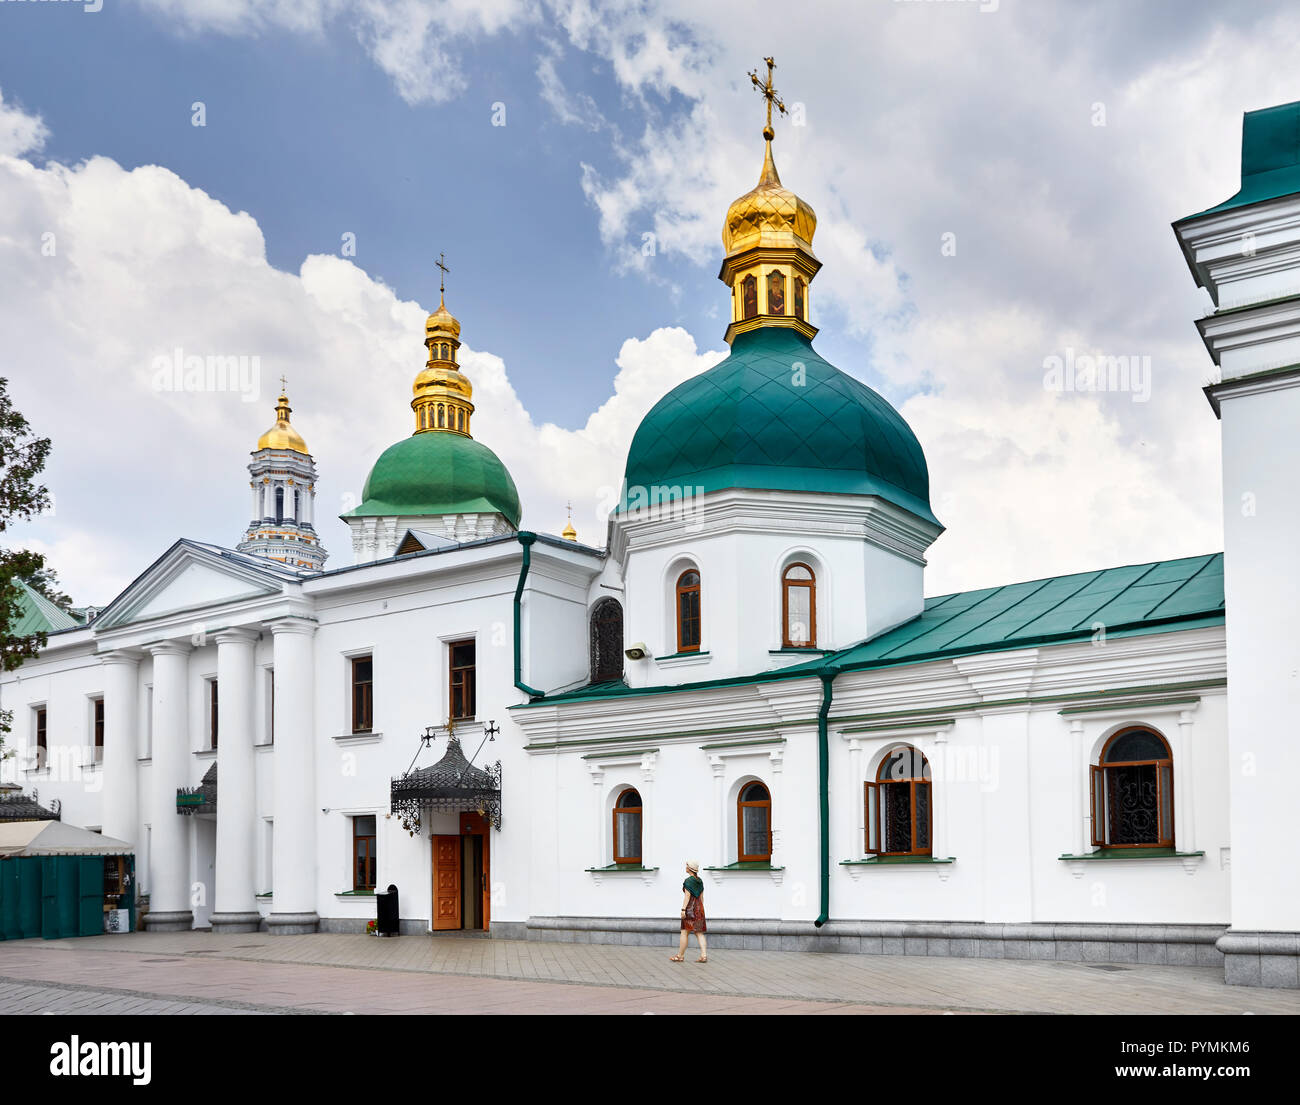 Woman in hat walking near Church with golden domes at Kiev Pechersk Lavra Christian complex. Old historical architecture in Kiev, Ukraine Stock Photo